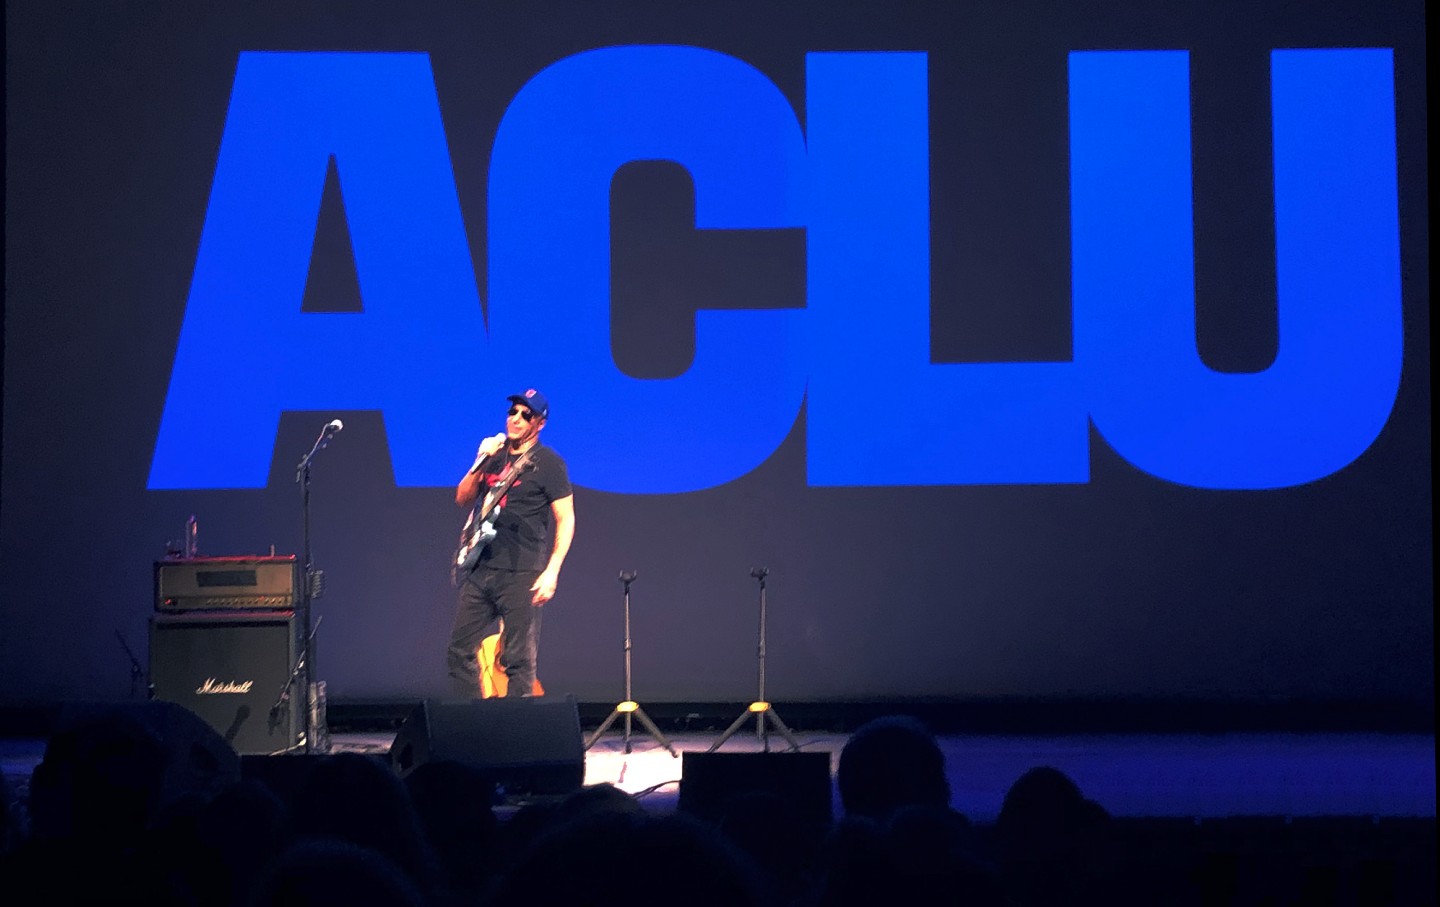 Tom Morello speaks about the ACLU at the Minetta Lane Theatre on September 18, 2019 in New York City.